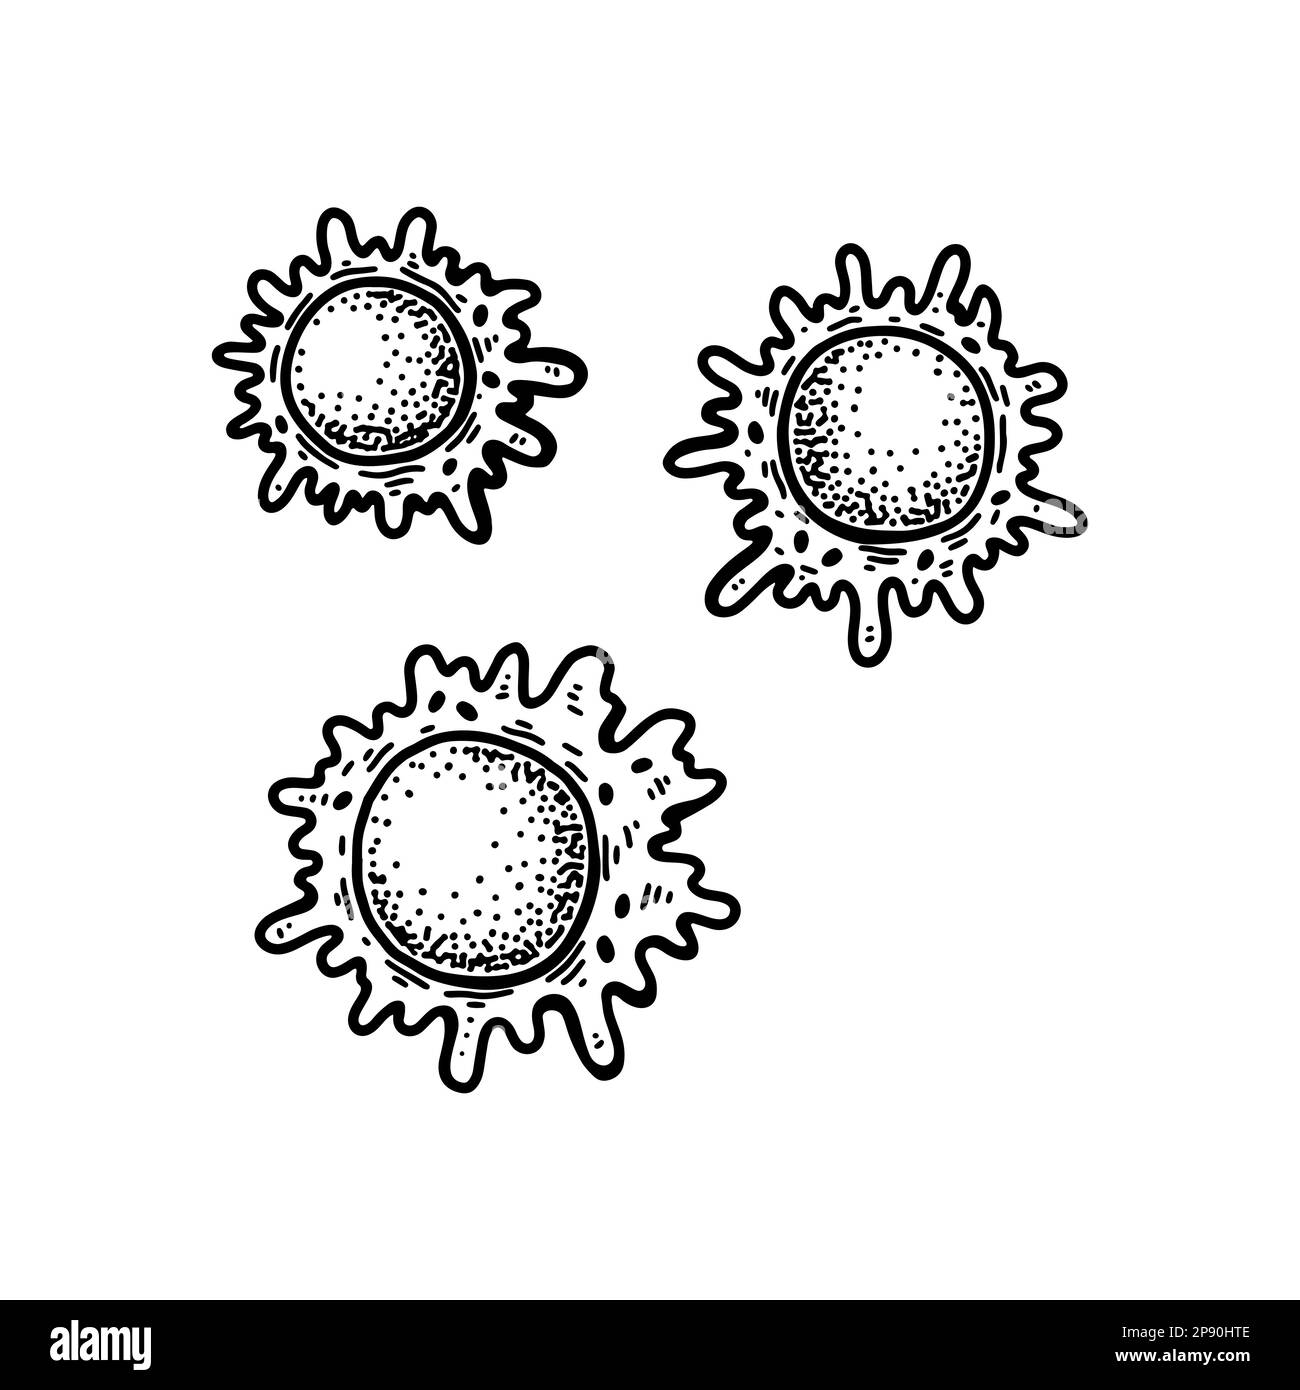 Macrophage blood cells isolated on white background. Hand drawn scientific microbiology vector illustration in sketch style Stock Vector